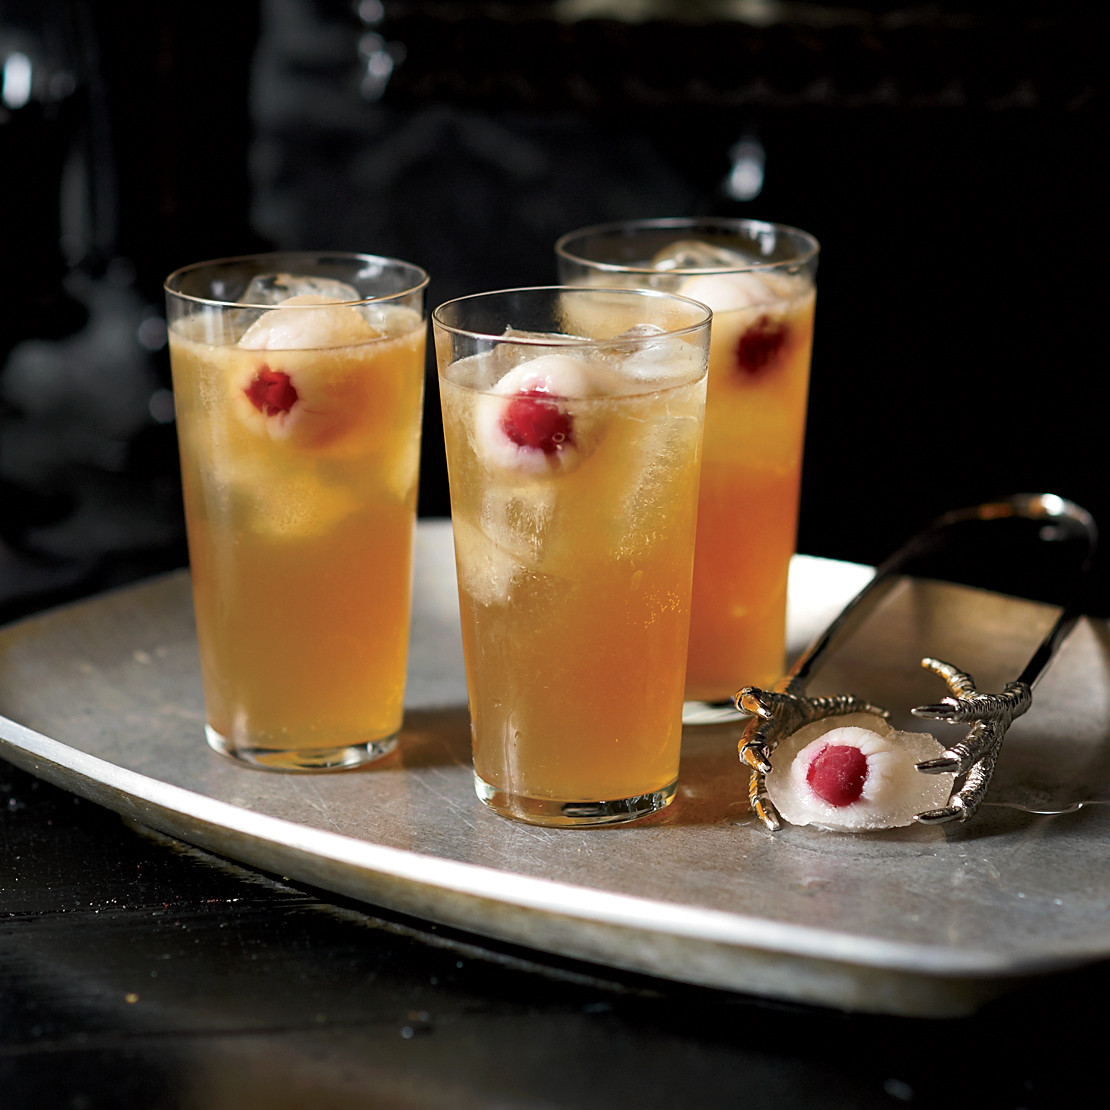 Halloween Food And Drinks
 These Creepy Halloween Drinks Will Have You Saying ‘Booyah